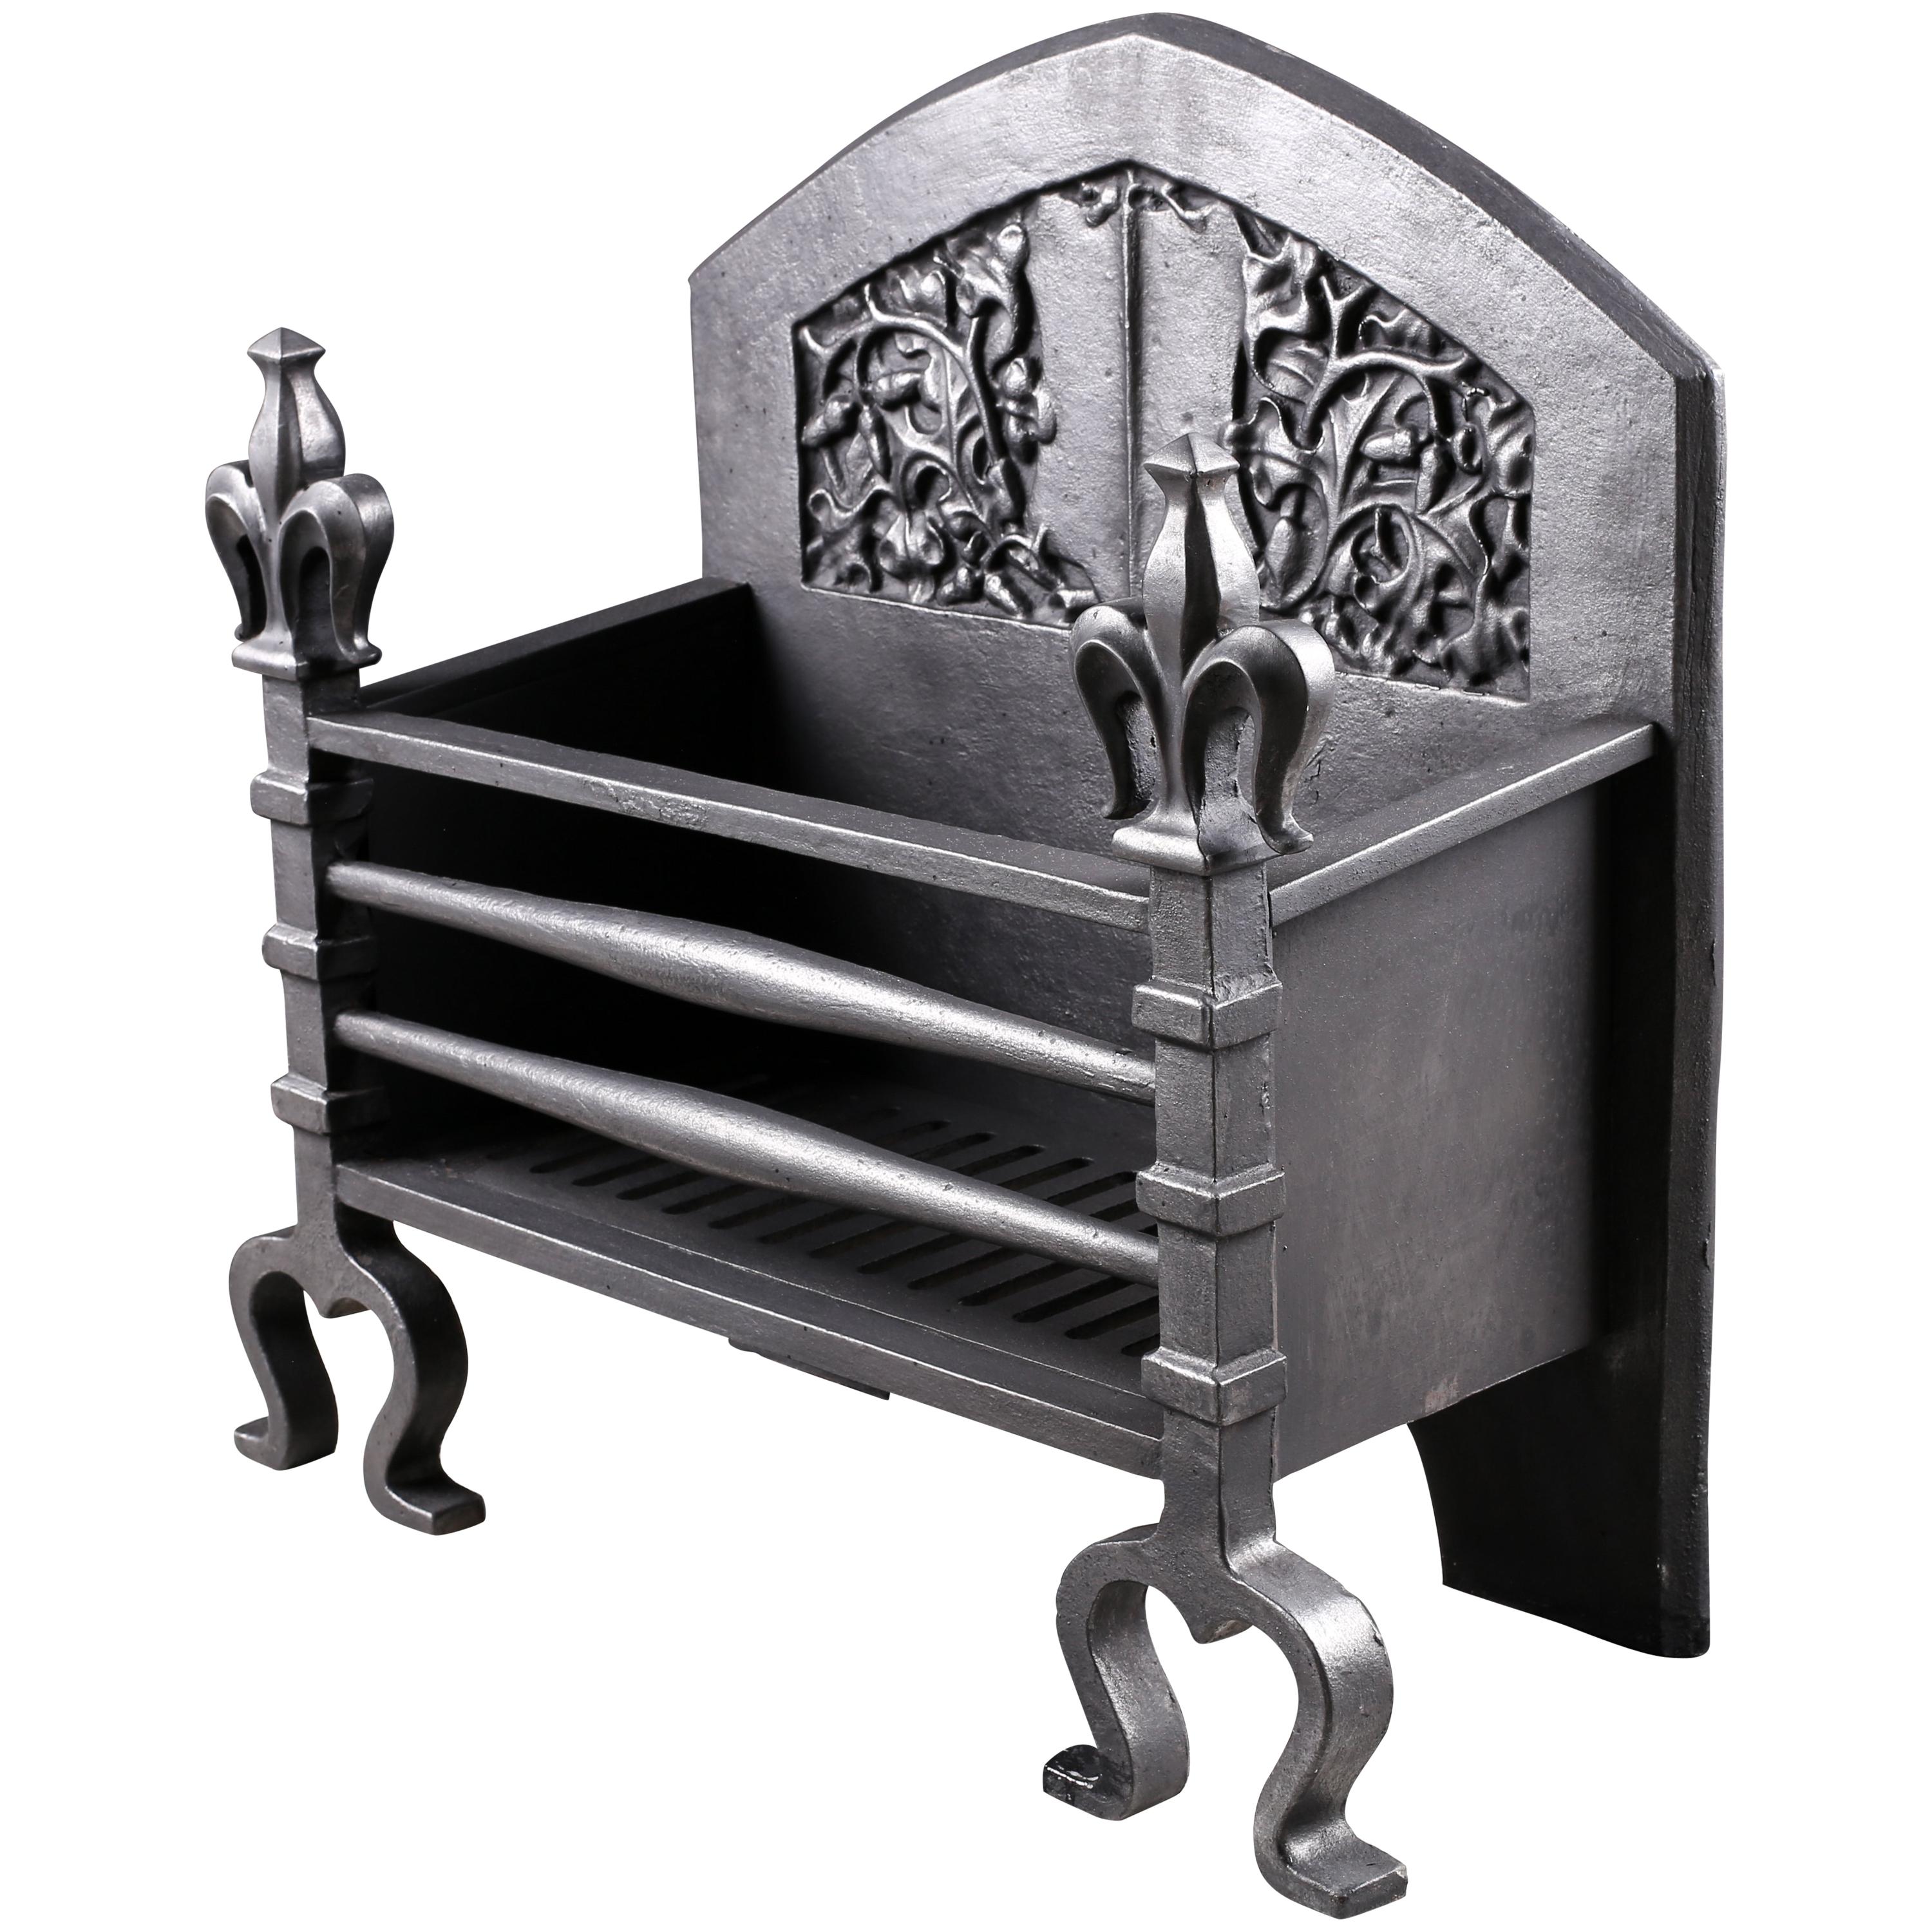 Cast Iron Arts & Crafts Victorian Fire Grate in the Renaissance Style, English